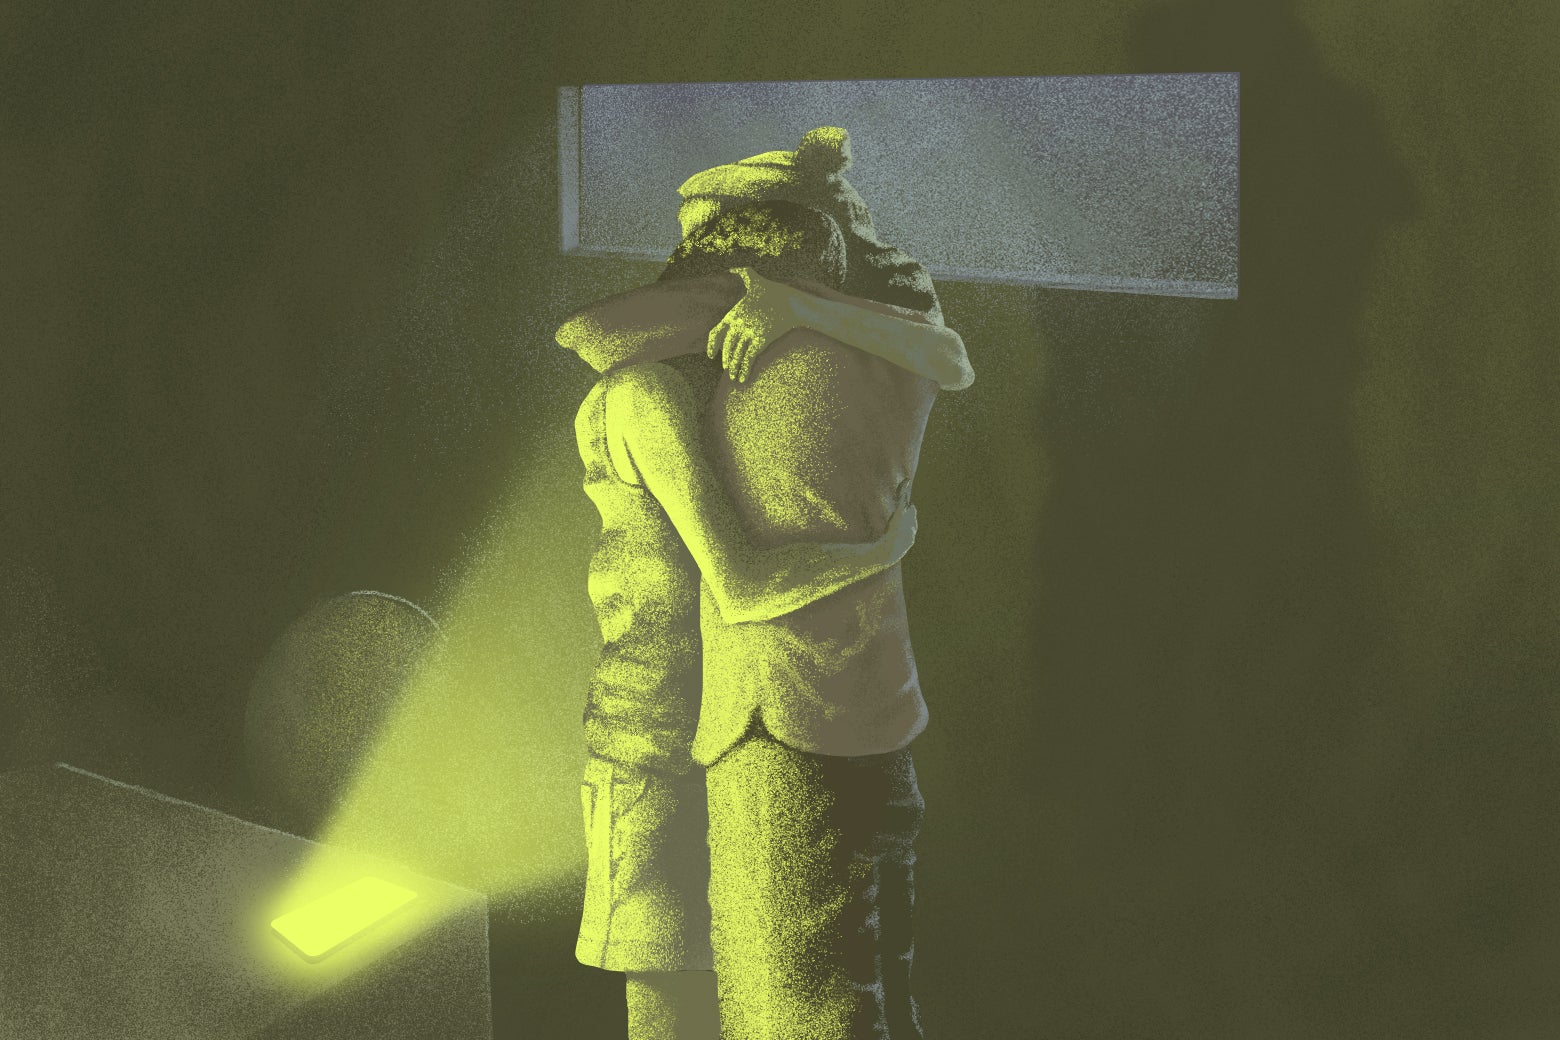 A couple hugs each other in a dimly lit room. On a table next to them, a phone lies face-up and lets out a yellowish-green light, which illuminates them. 